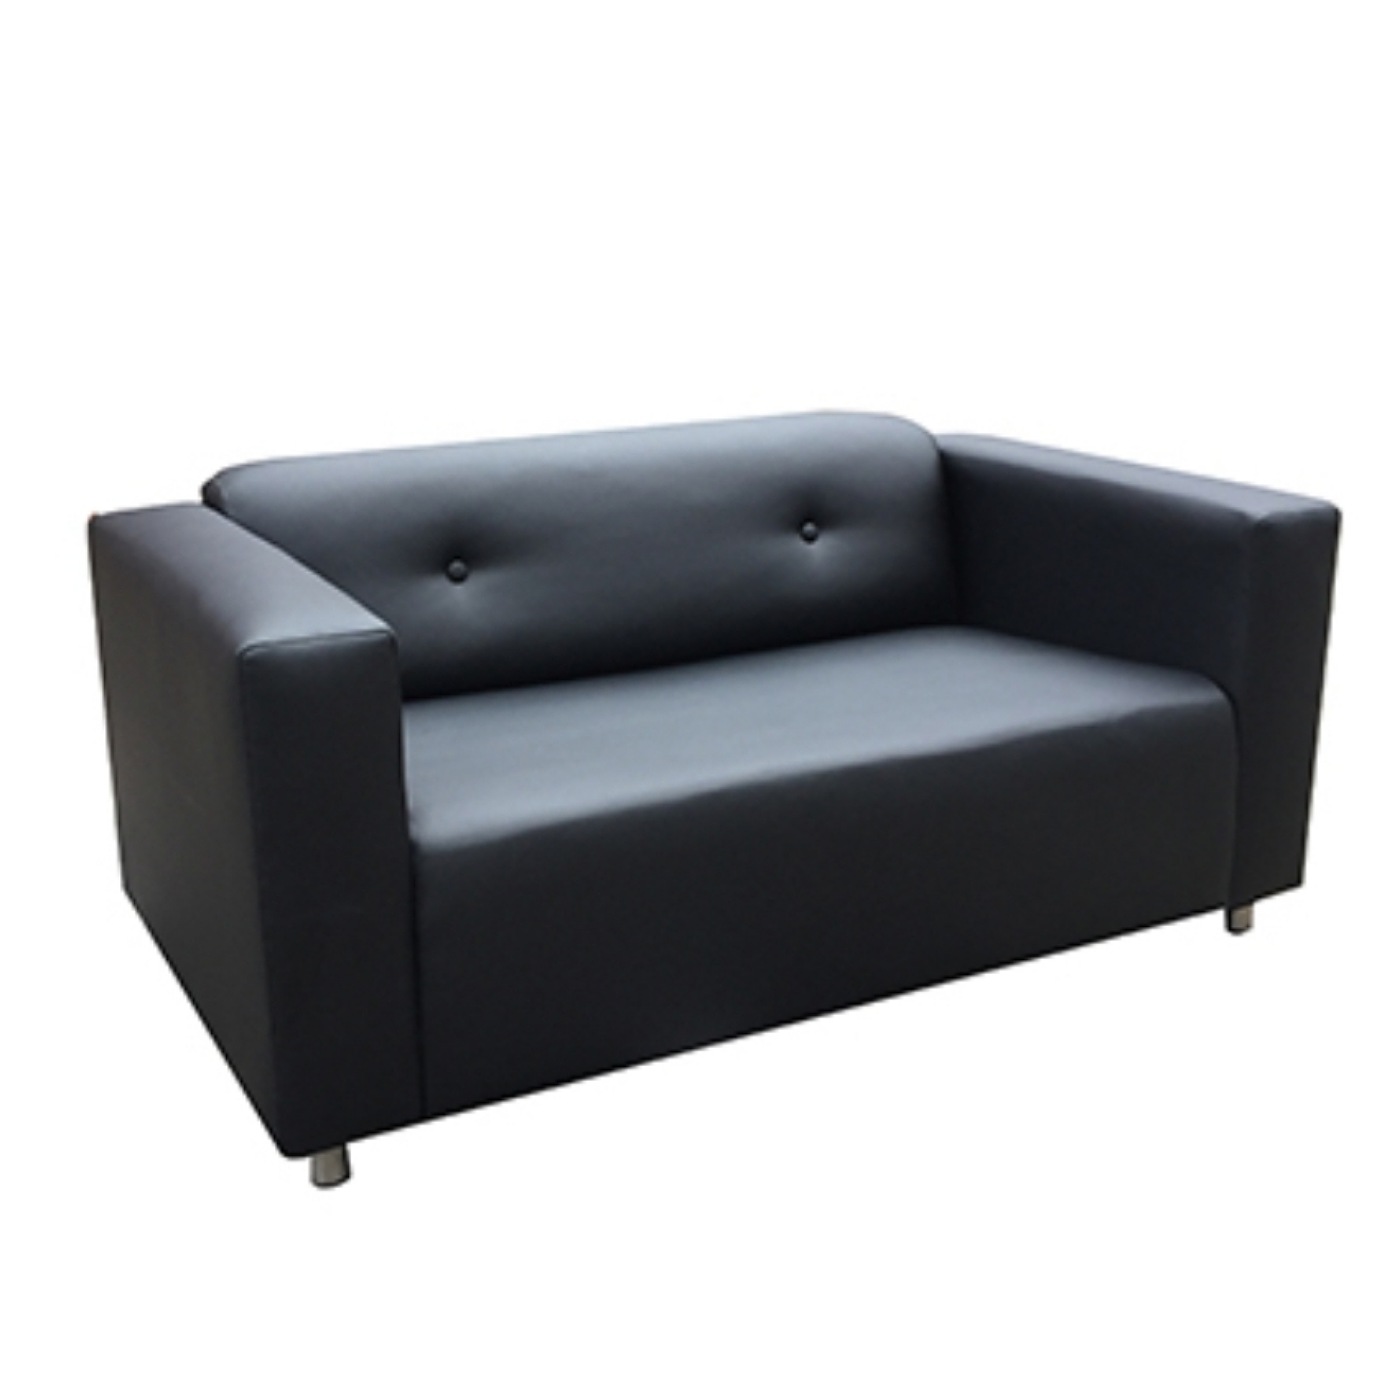 Black Two Seat Leather Couch With Two Buttons On The Back Rest.